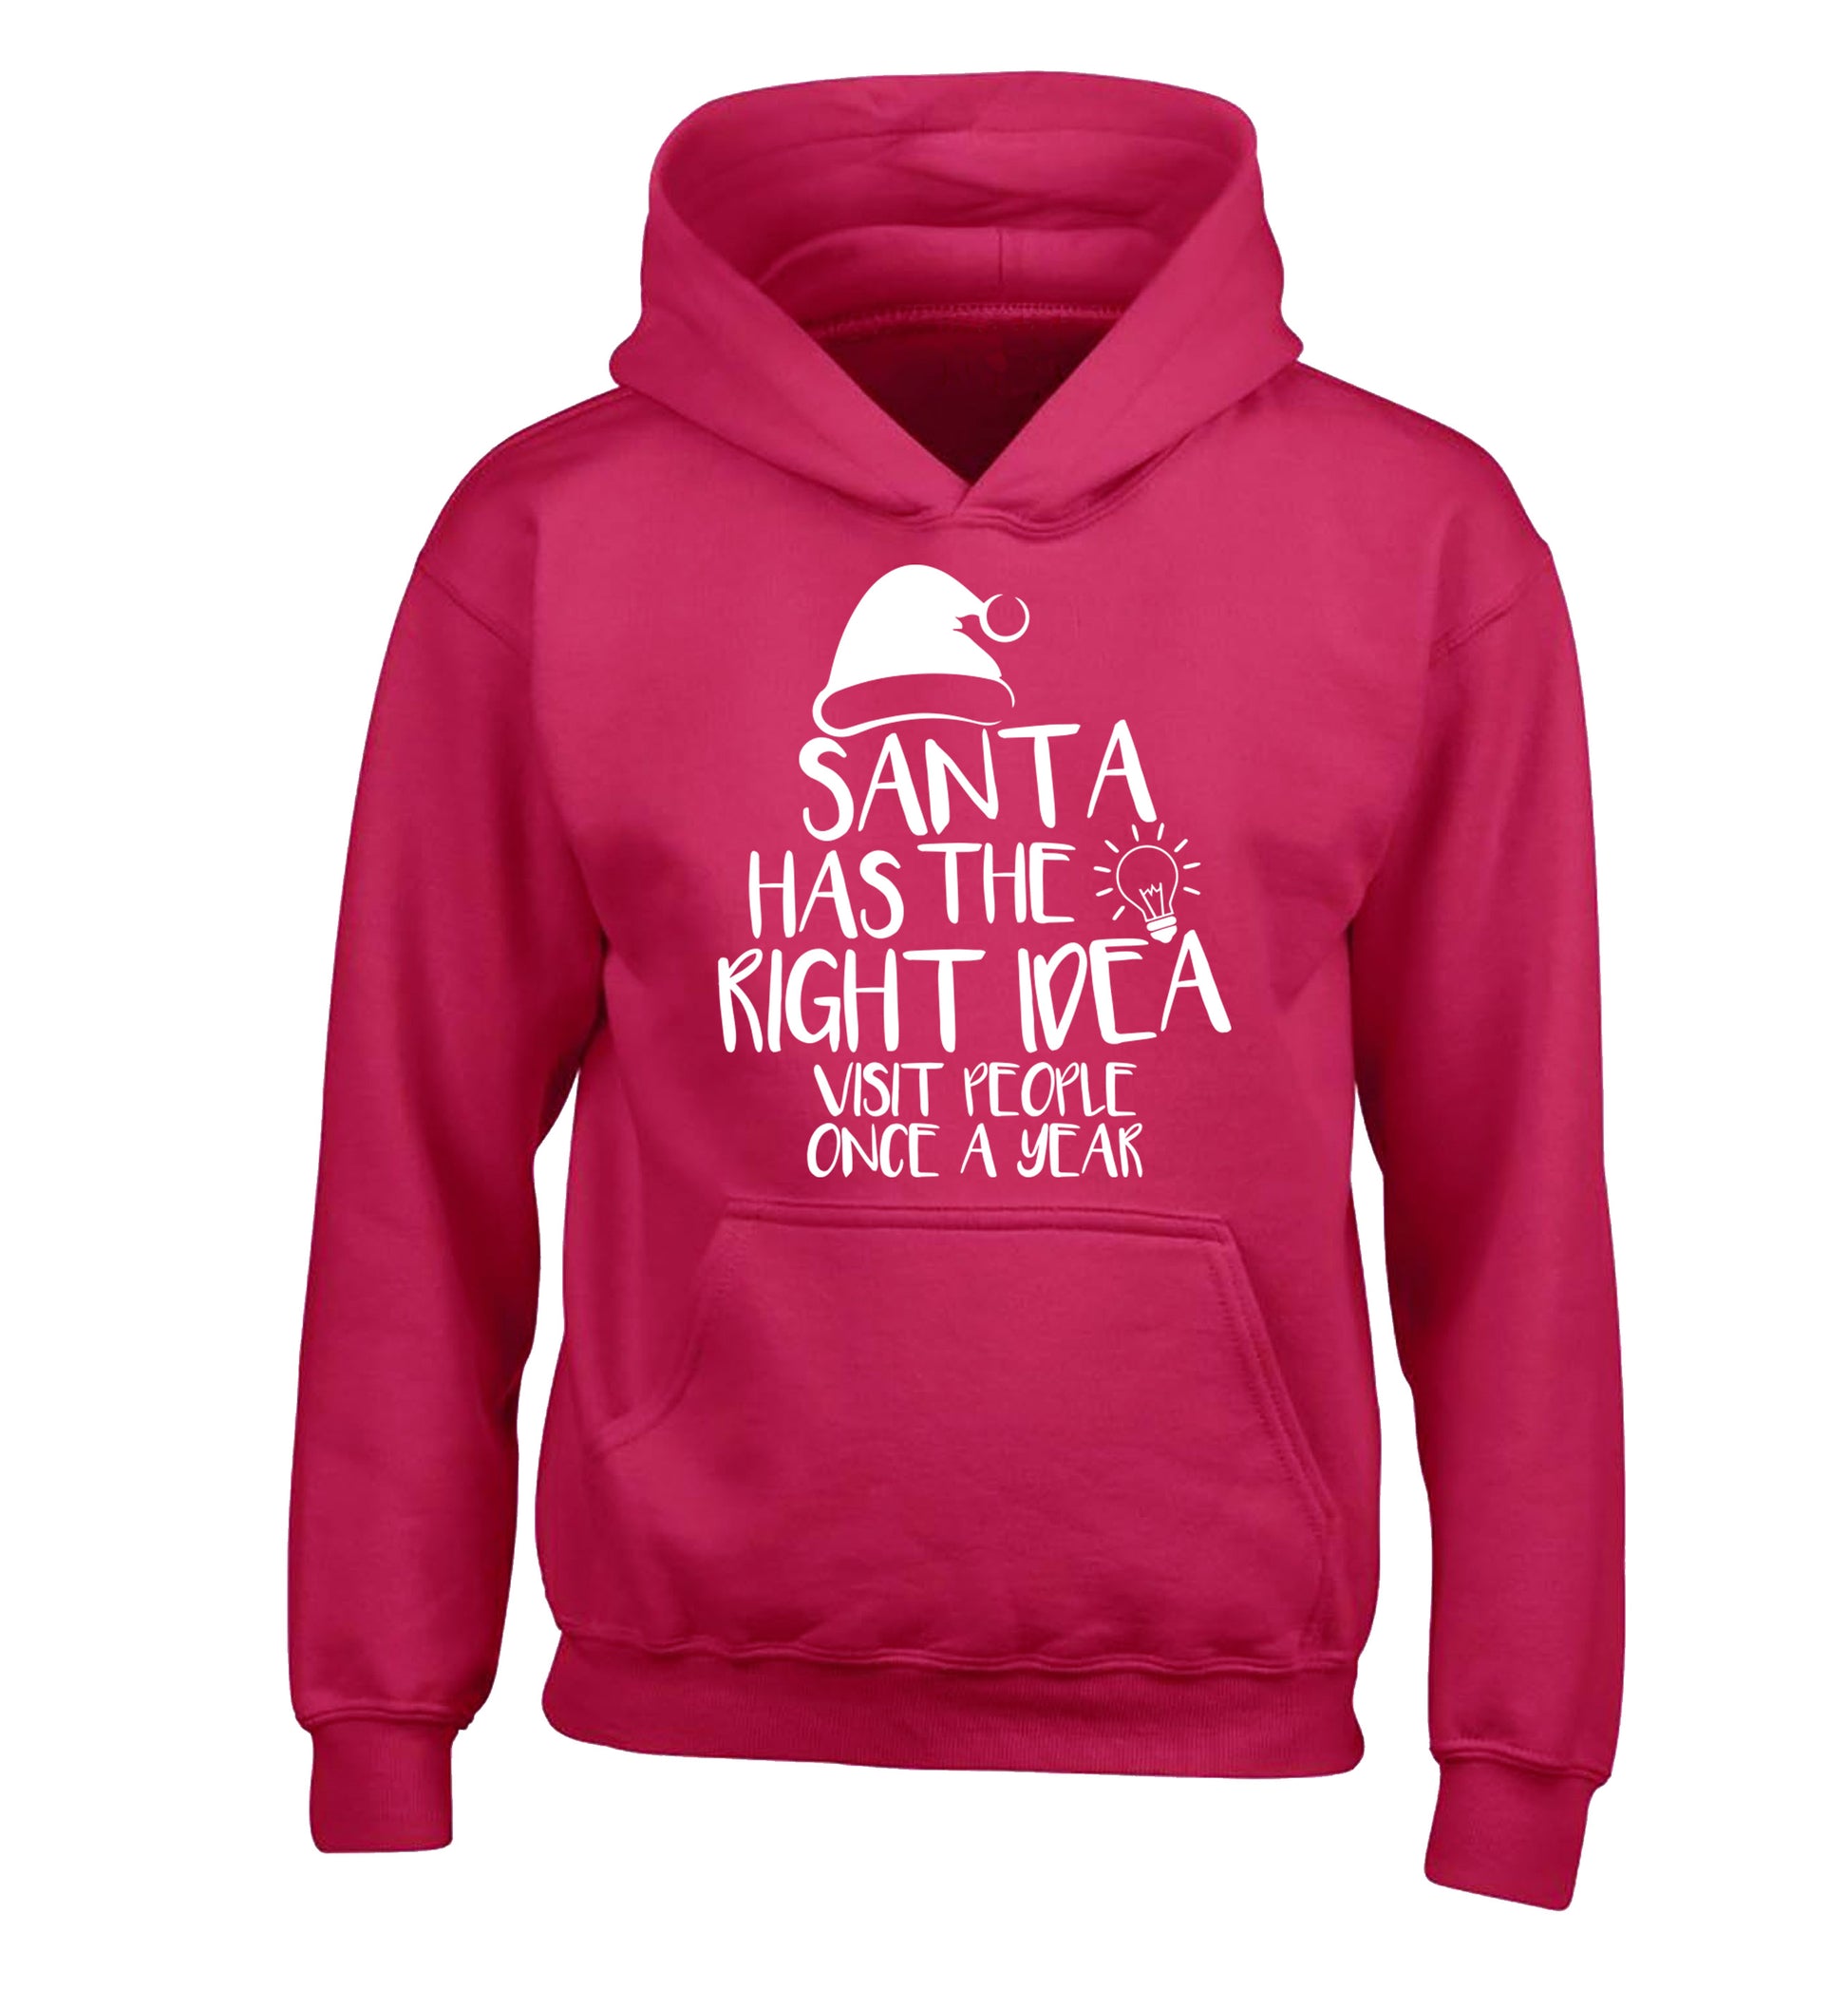 Santa has the right idea visit people once a year children's pink hoodie 12-14 Years